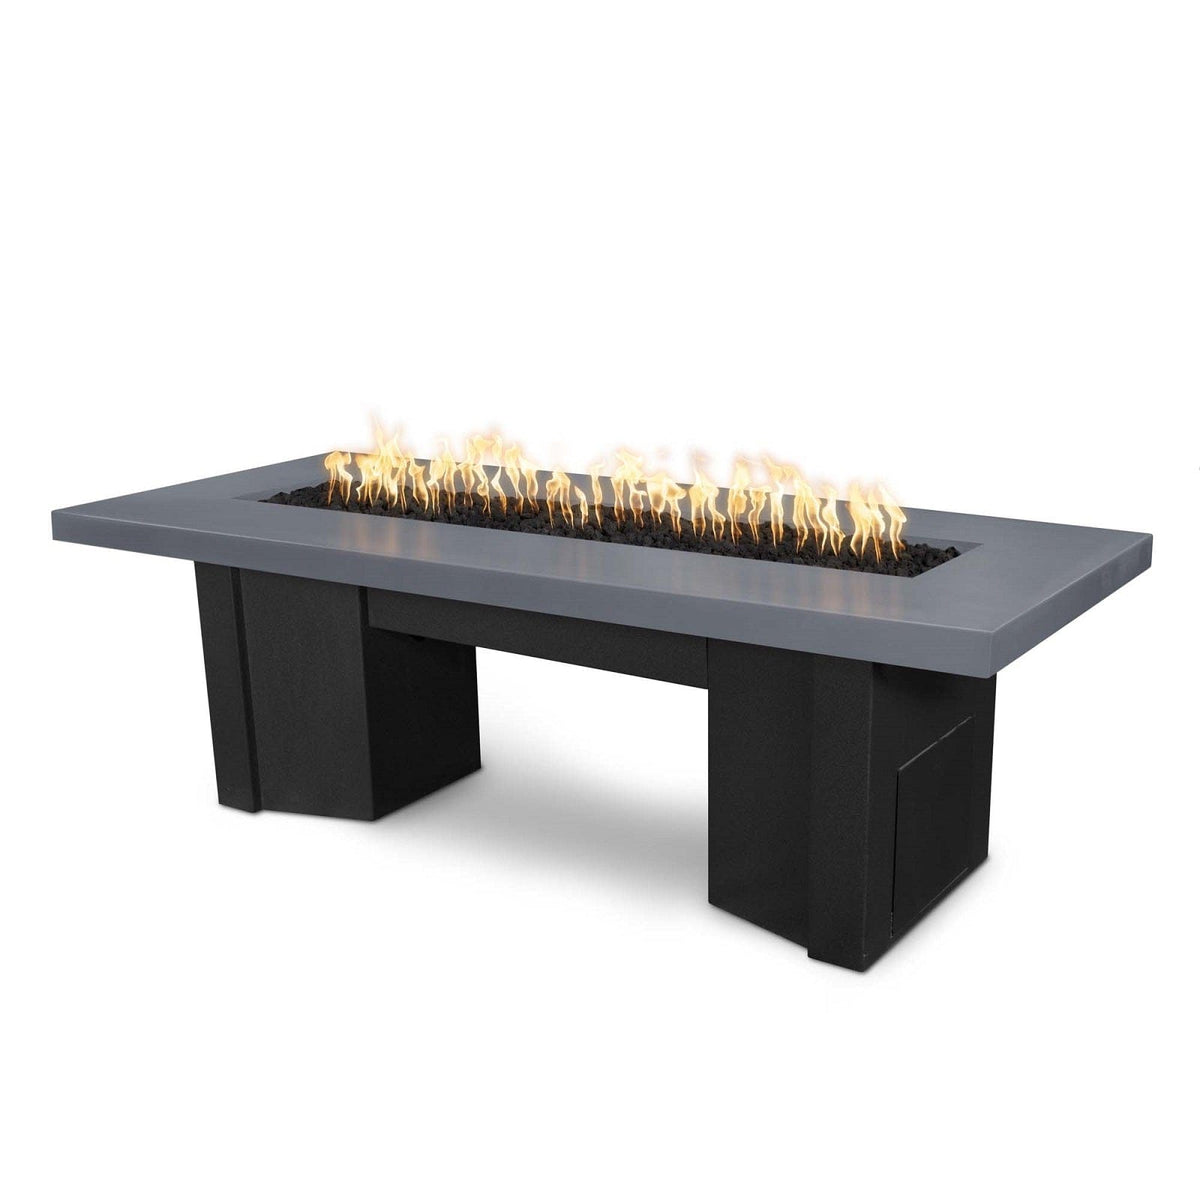 The Outdoor Plus Fire Features Gray (-GRY) / Black Powder Coated Steel (-BLK) The Outdoor Plus 60&quot; Alameda Fire Table Smooth Concrete in Natural Gas - Match Lit with Flame Sense System / OPT-ALMGFRC60FSML-NG